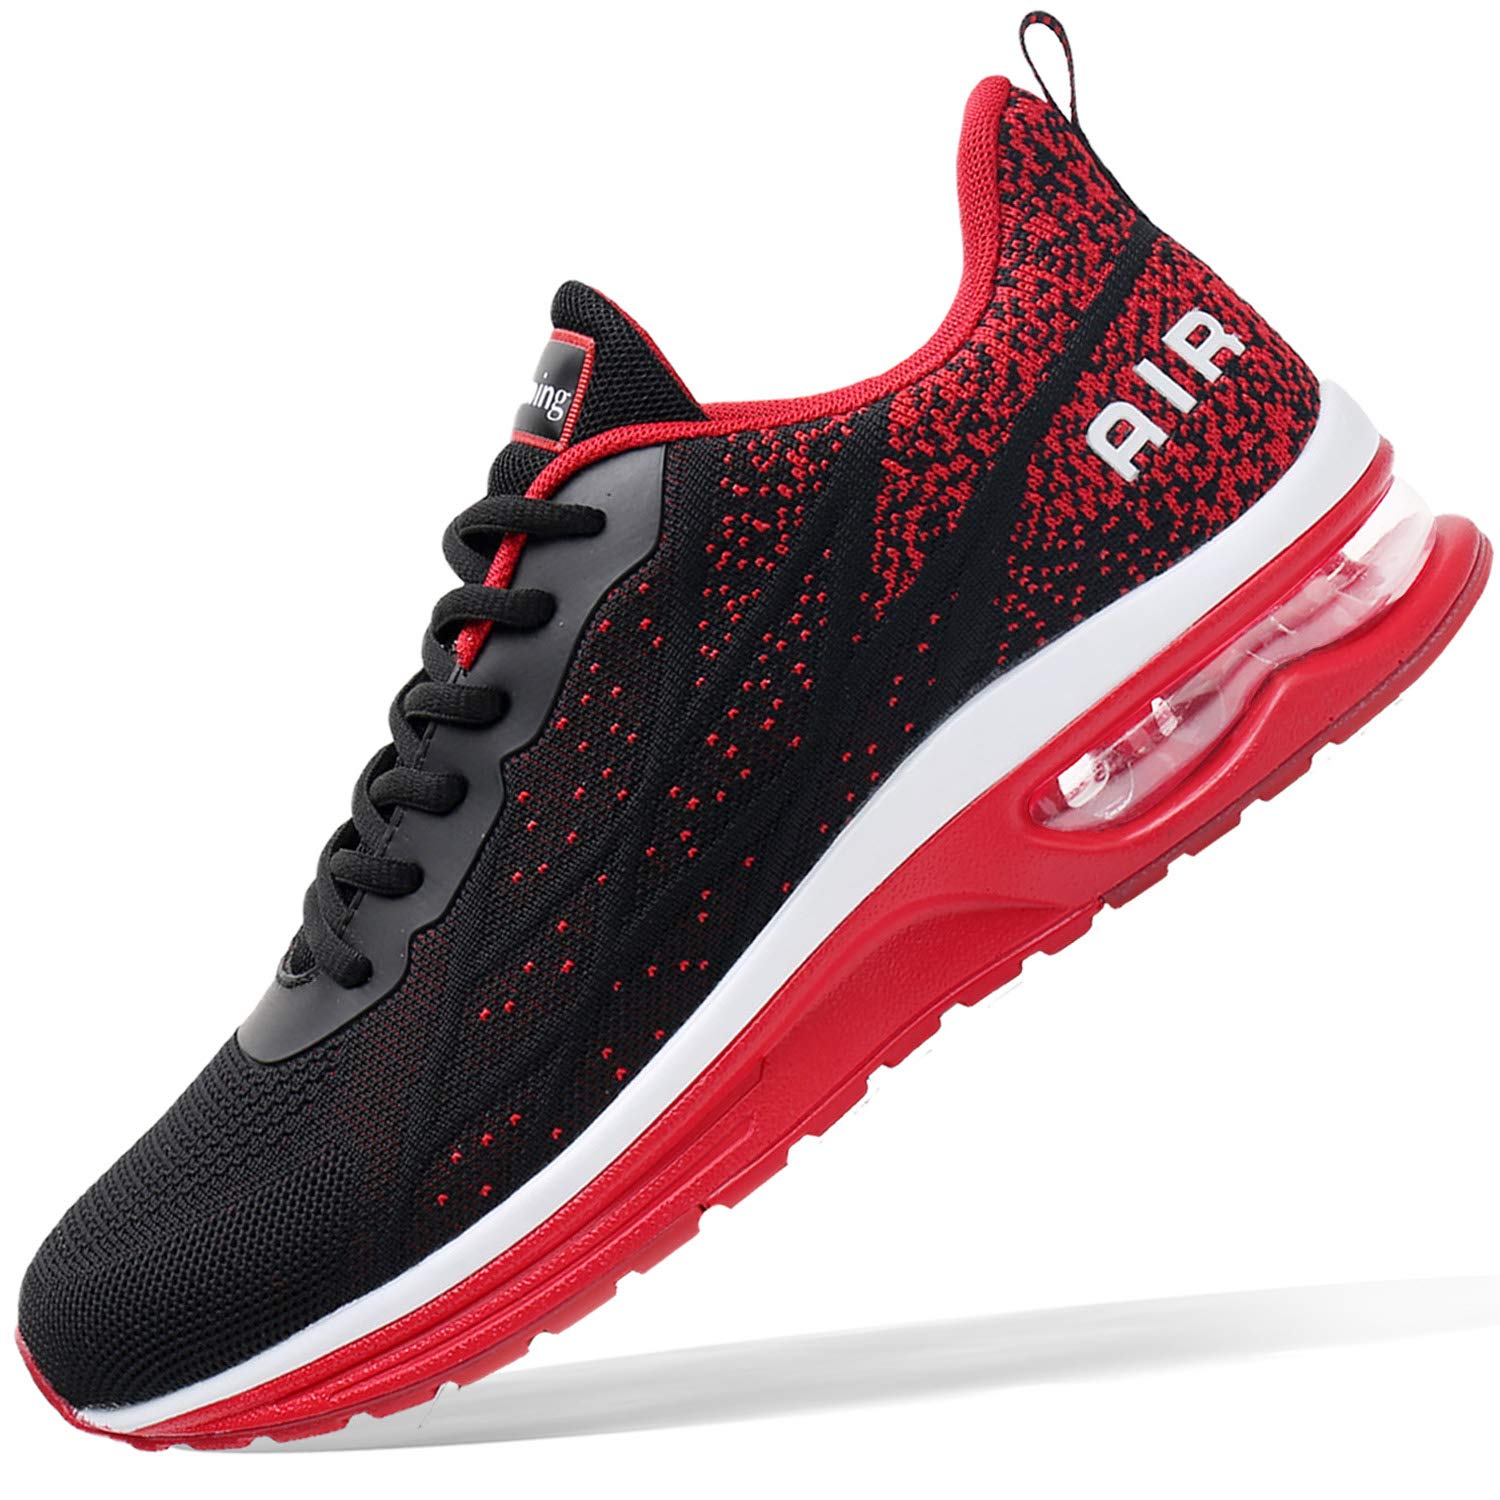 Buy SPACE-RIDER Men's Running Shoes online | Campus Shoes